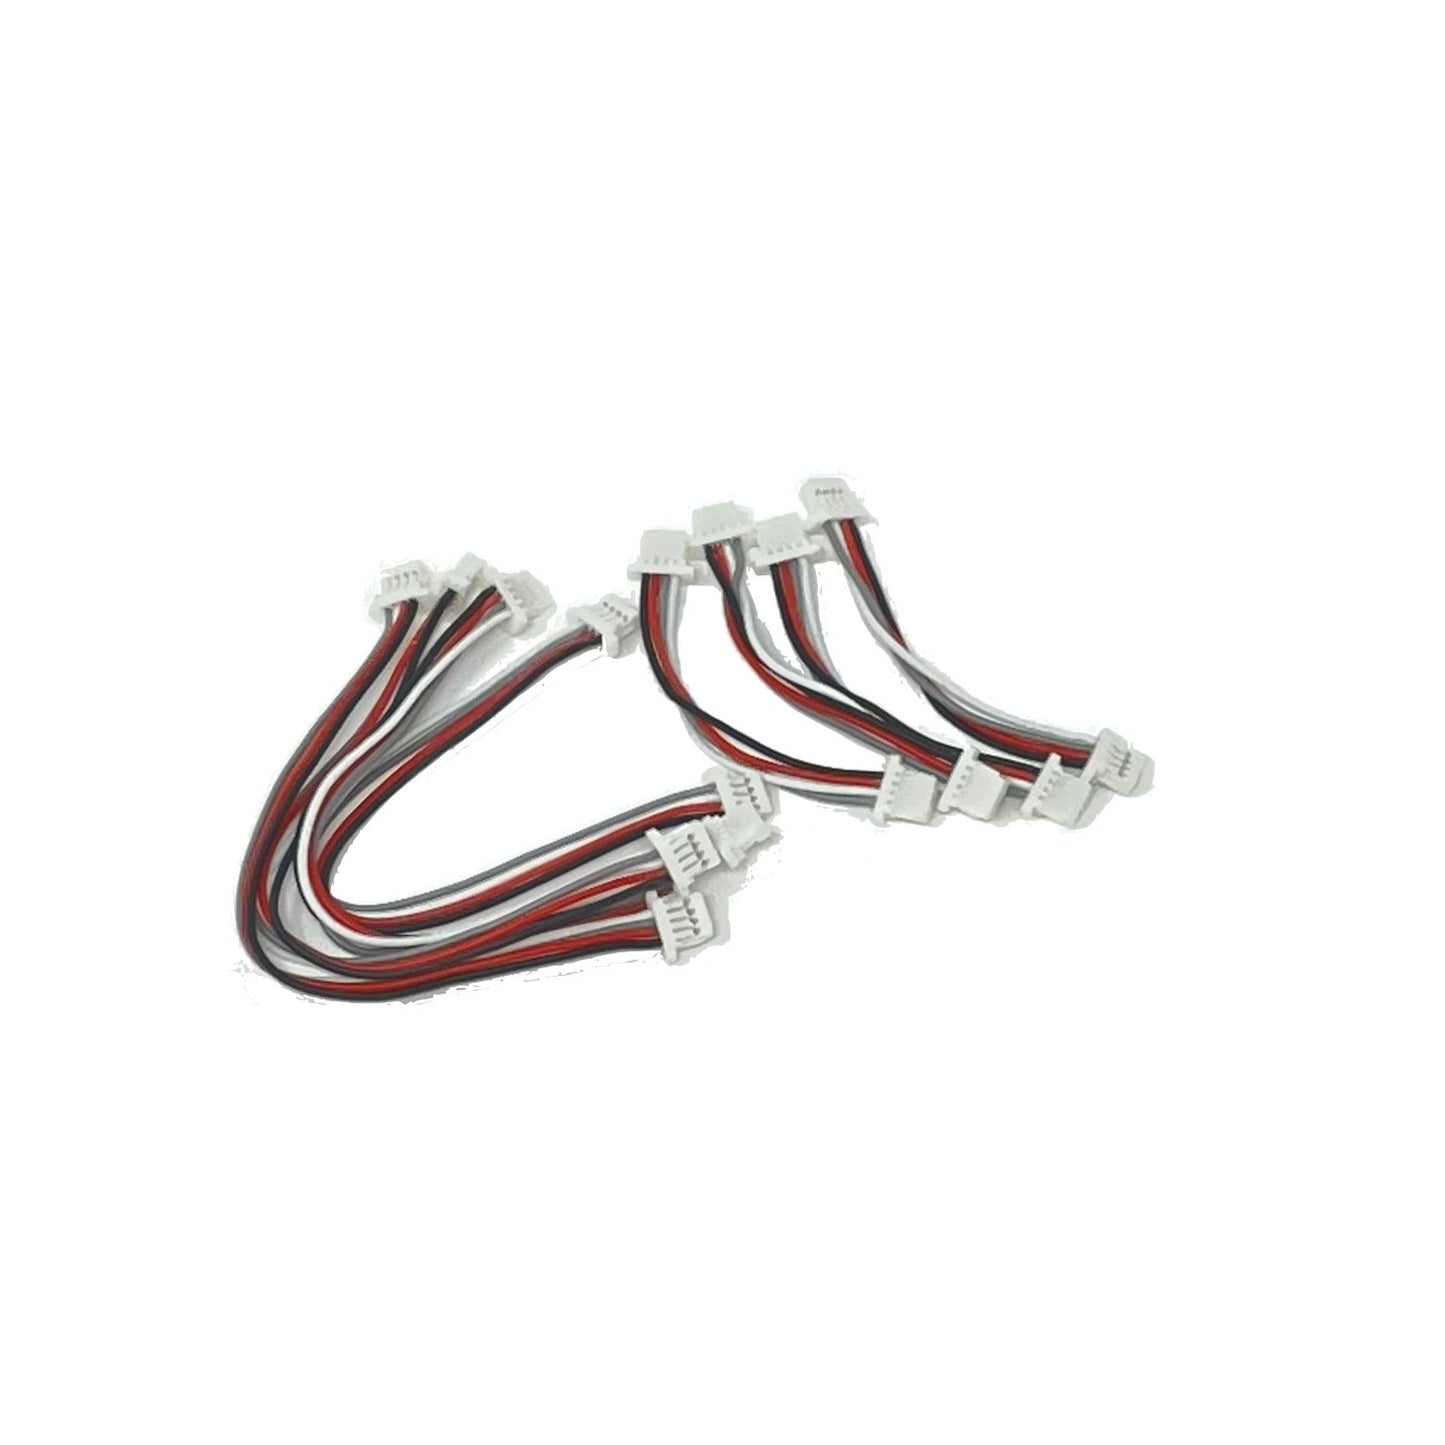 5v Infini Rainbow LED Silicone Cable Kit (4x 35mm / 4x 70mm)